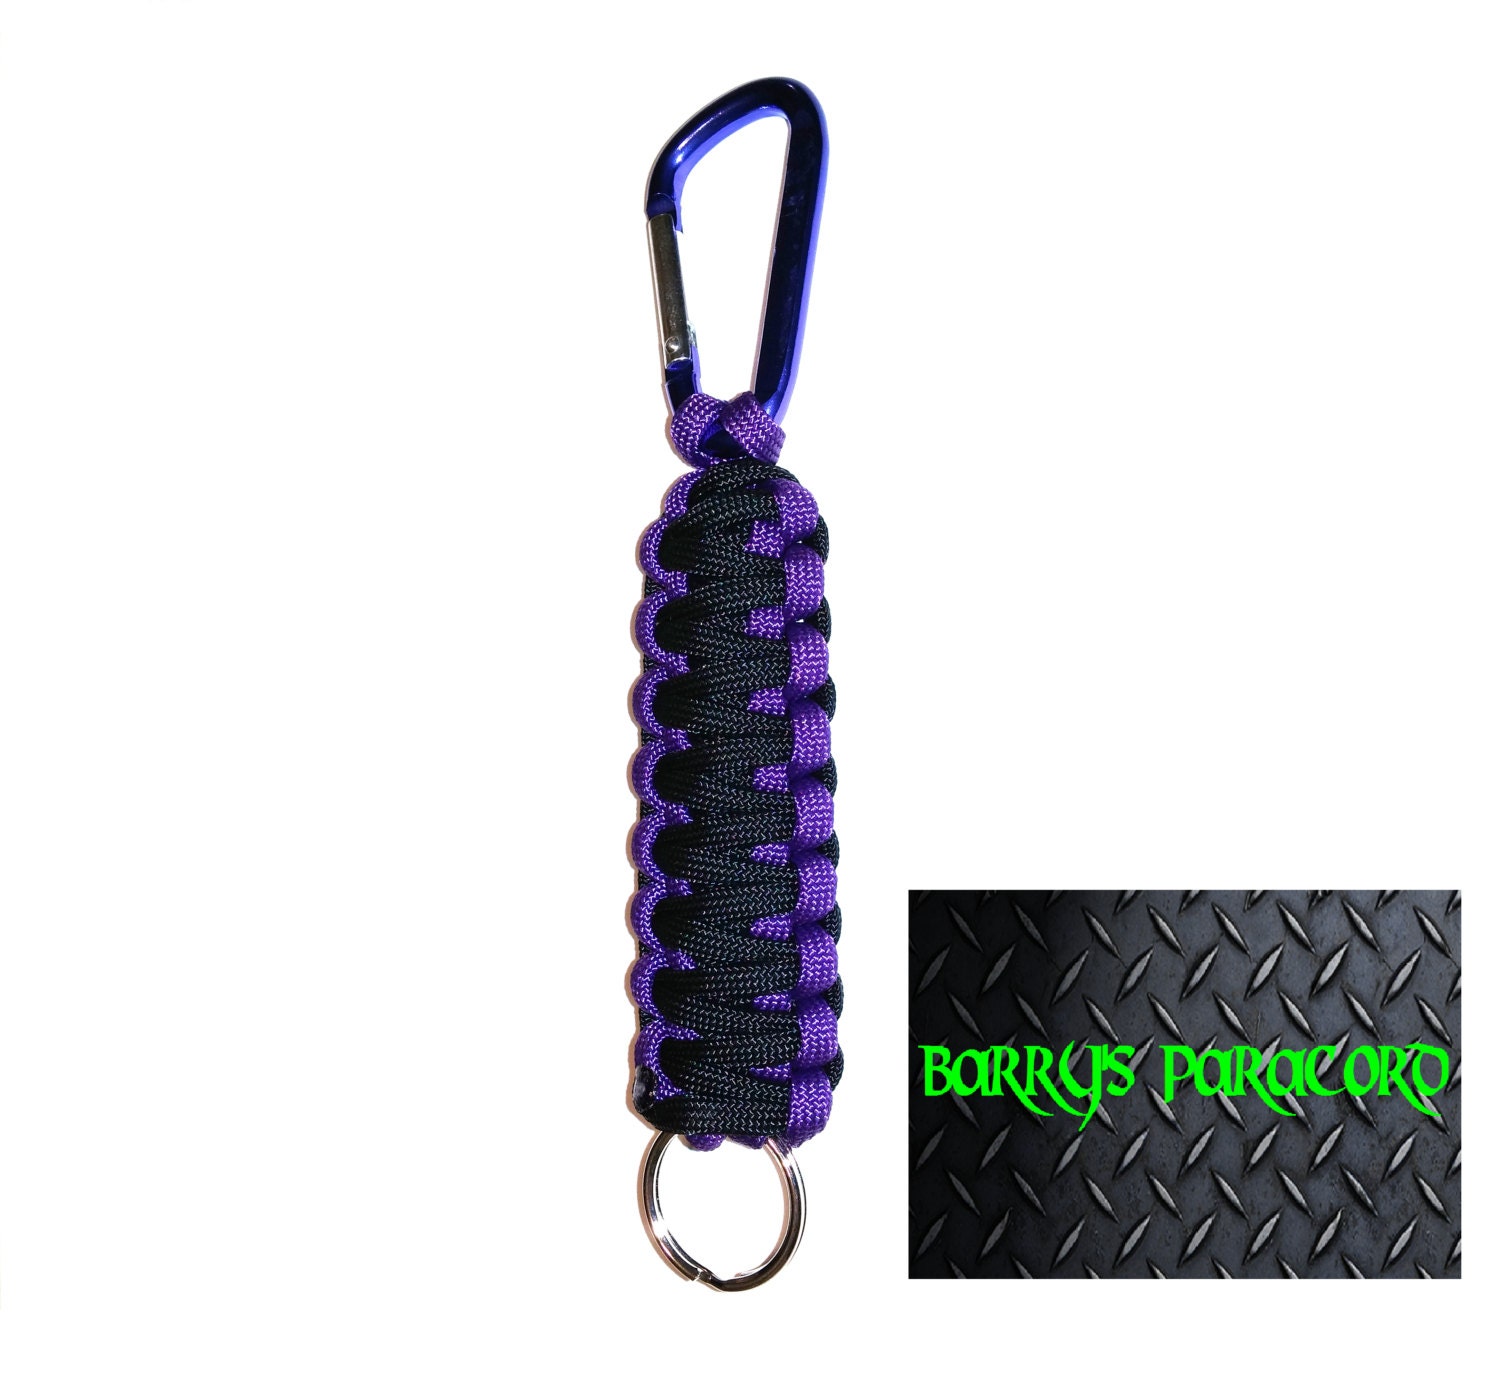 Paracord King Cobra Keychain with Carabiner by BarrysParacord